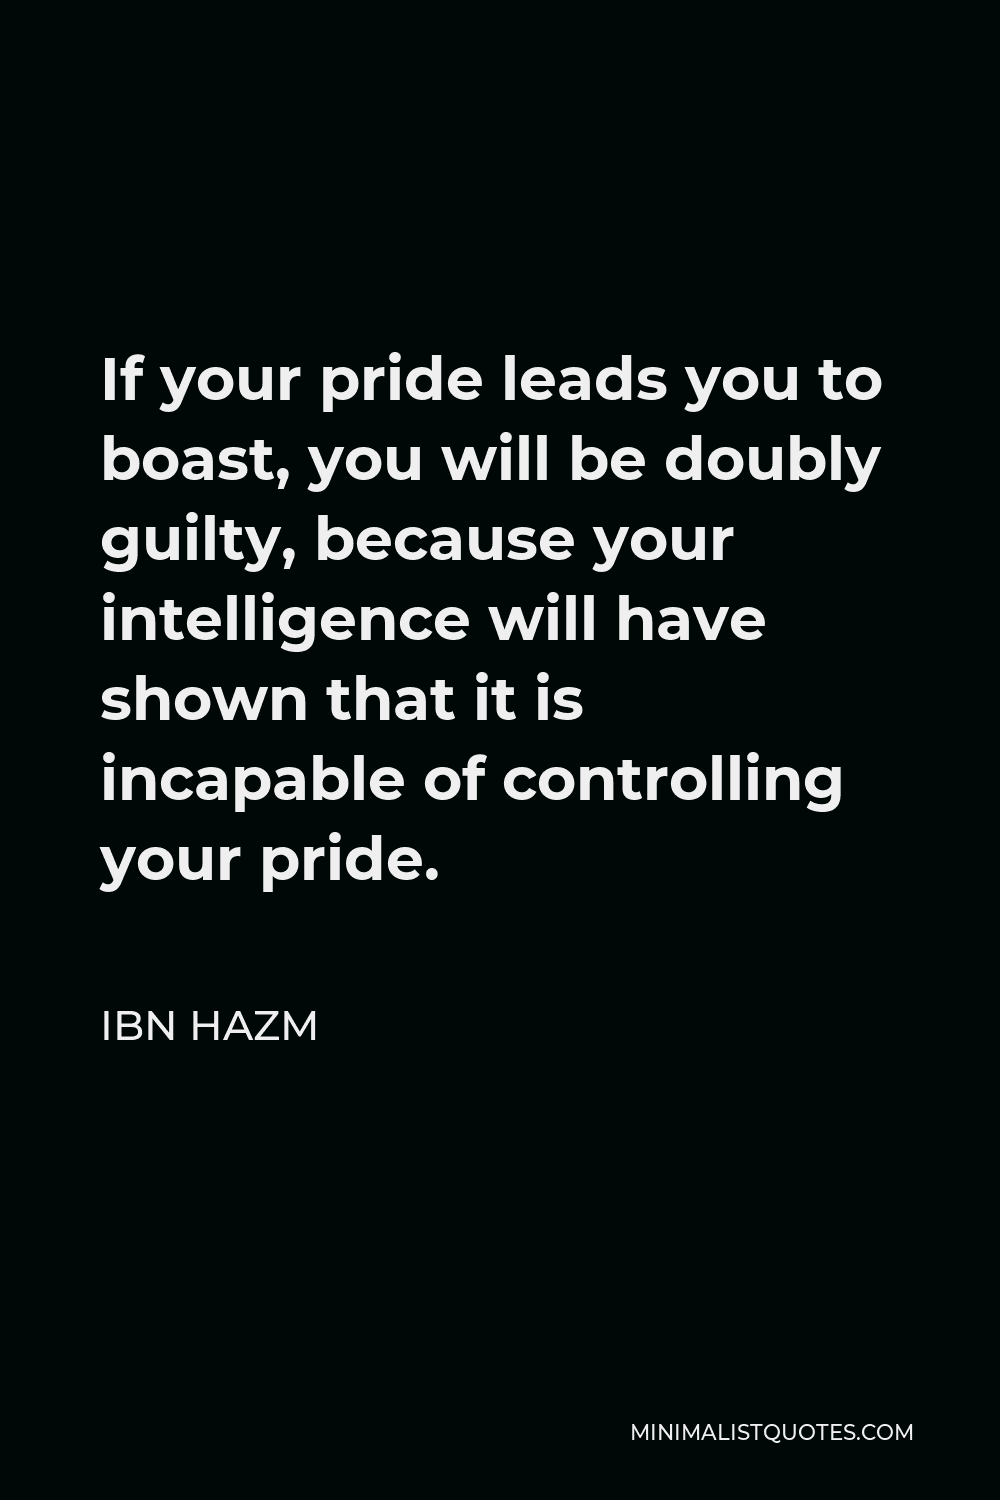 Ibn Hazm Quote - If your pride leads you to boast, you will be doubly guilty, because your intelligence will have shown that it is incapable of controlling your pride.